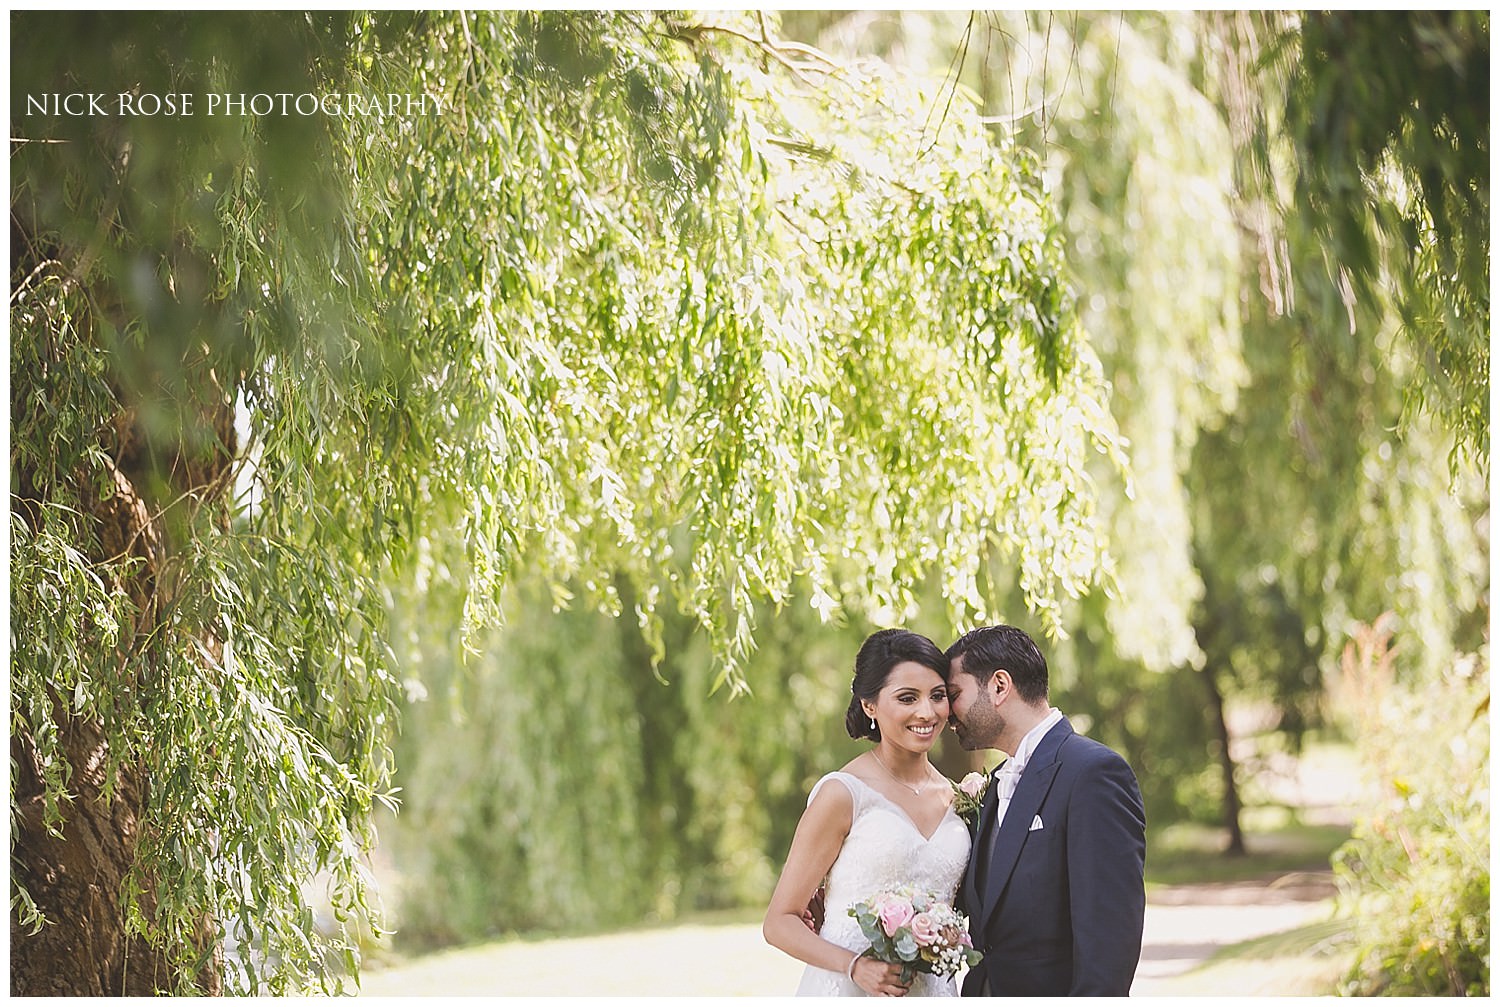  Wedding photograph under a willow tree at Hever Castle Kent 